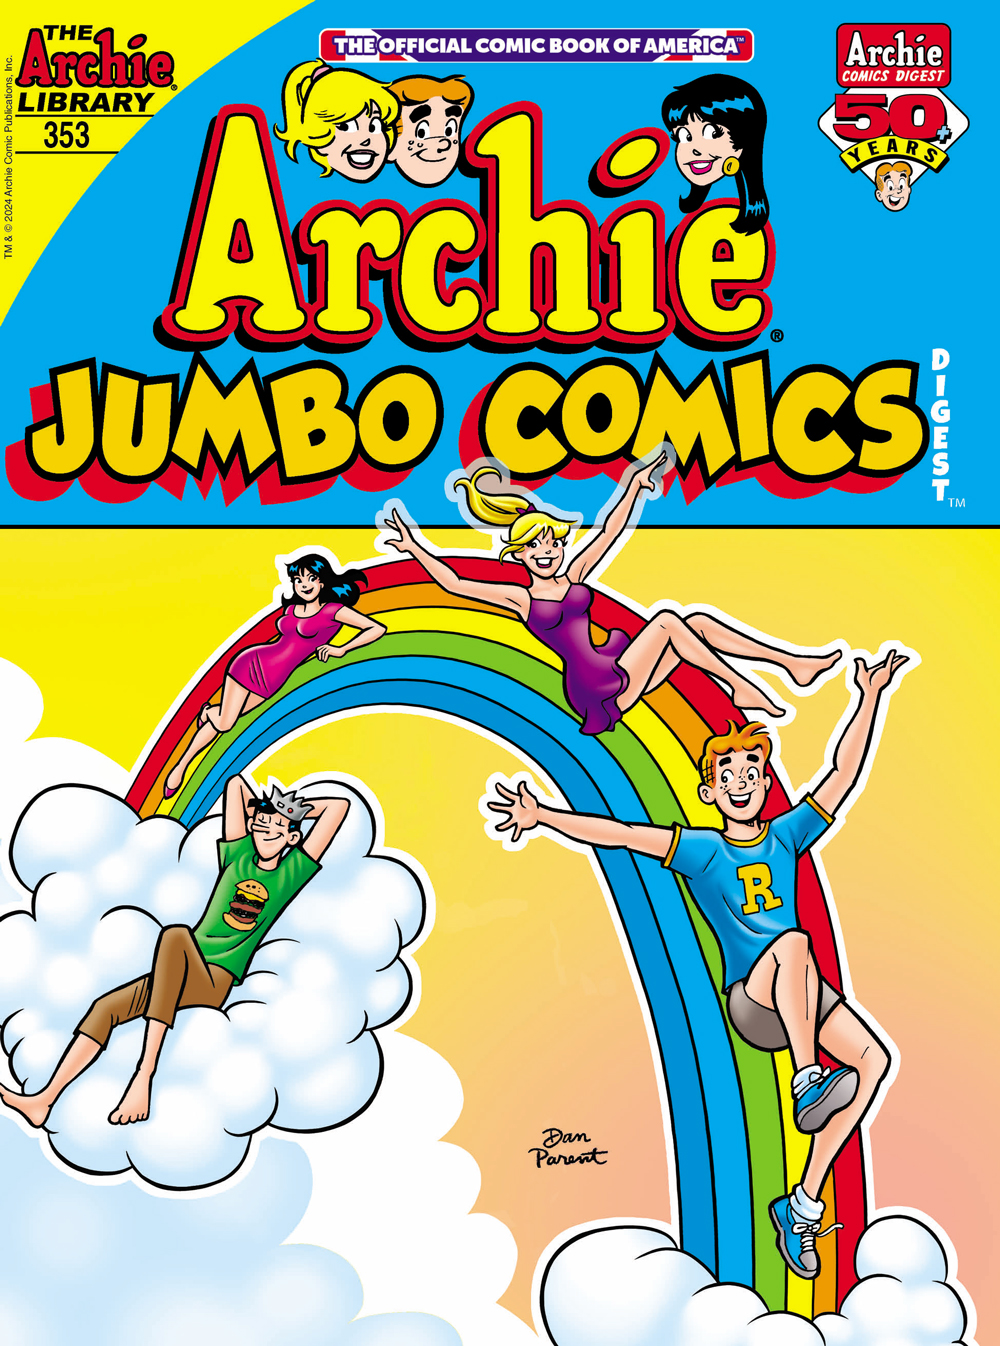 Archie, Betty, and Veronica slide down a rainbow. Jughead floats on a cloud next to them, reclining.